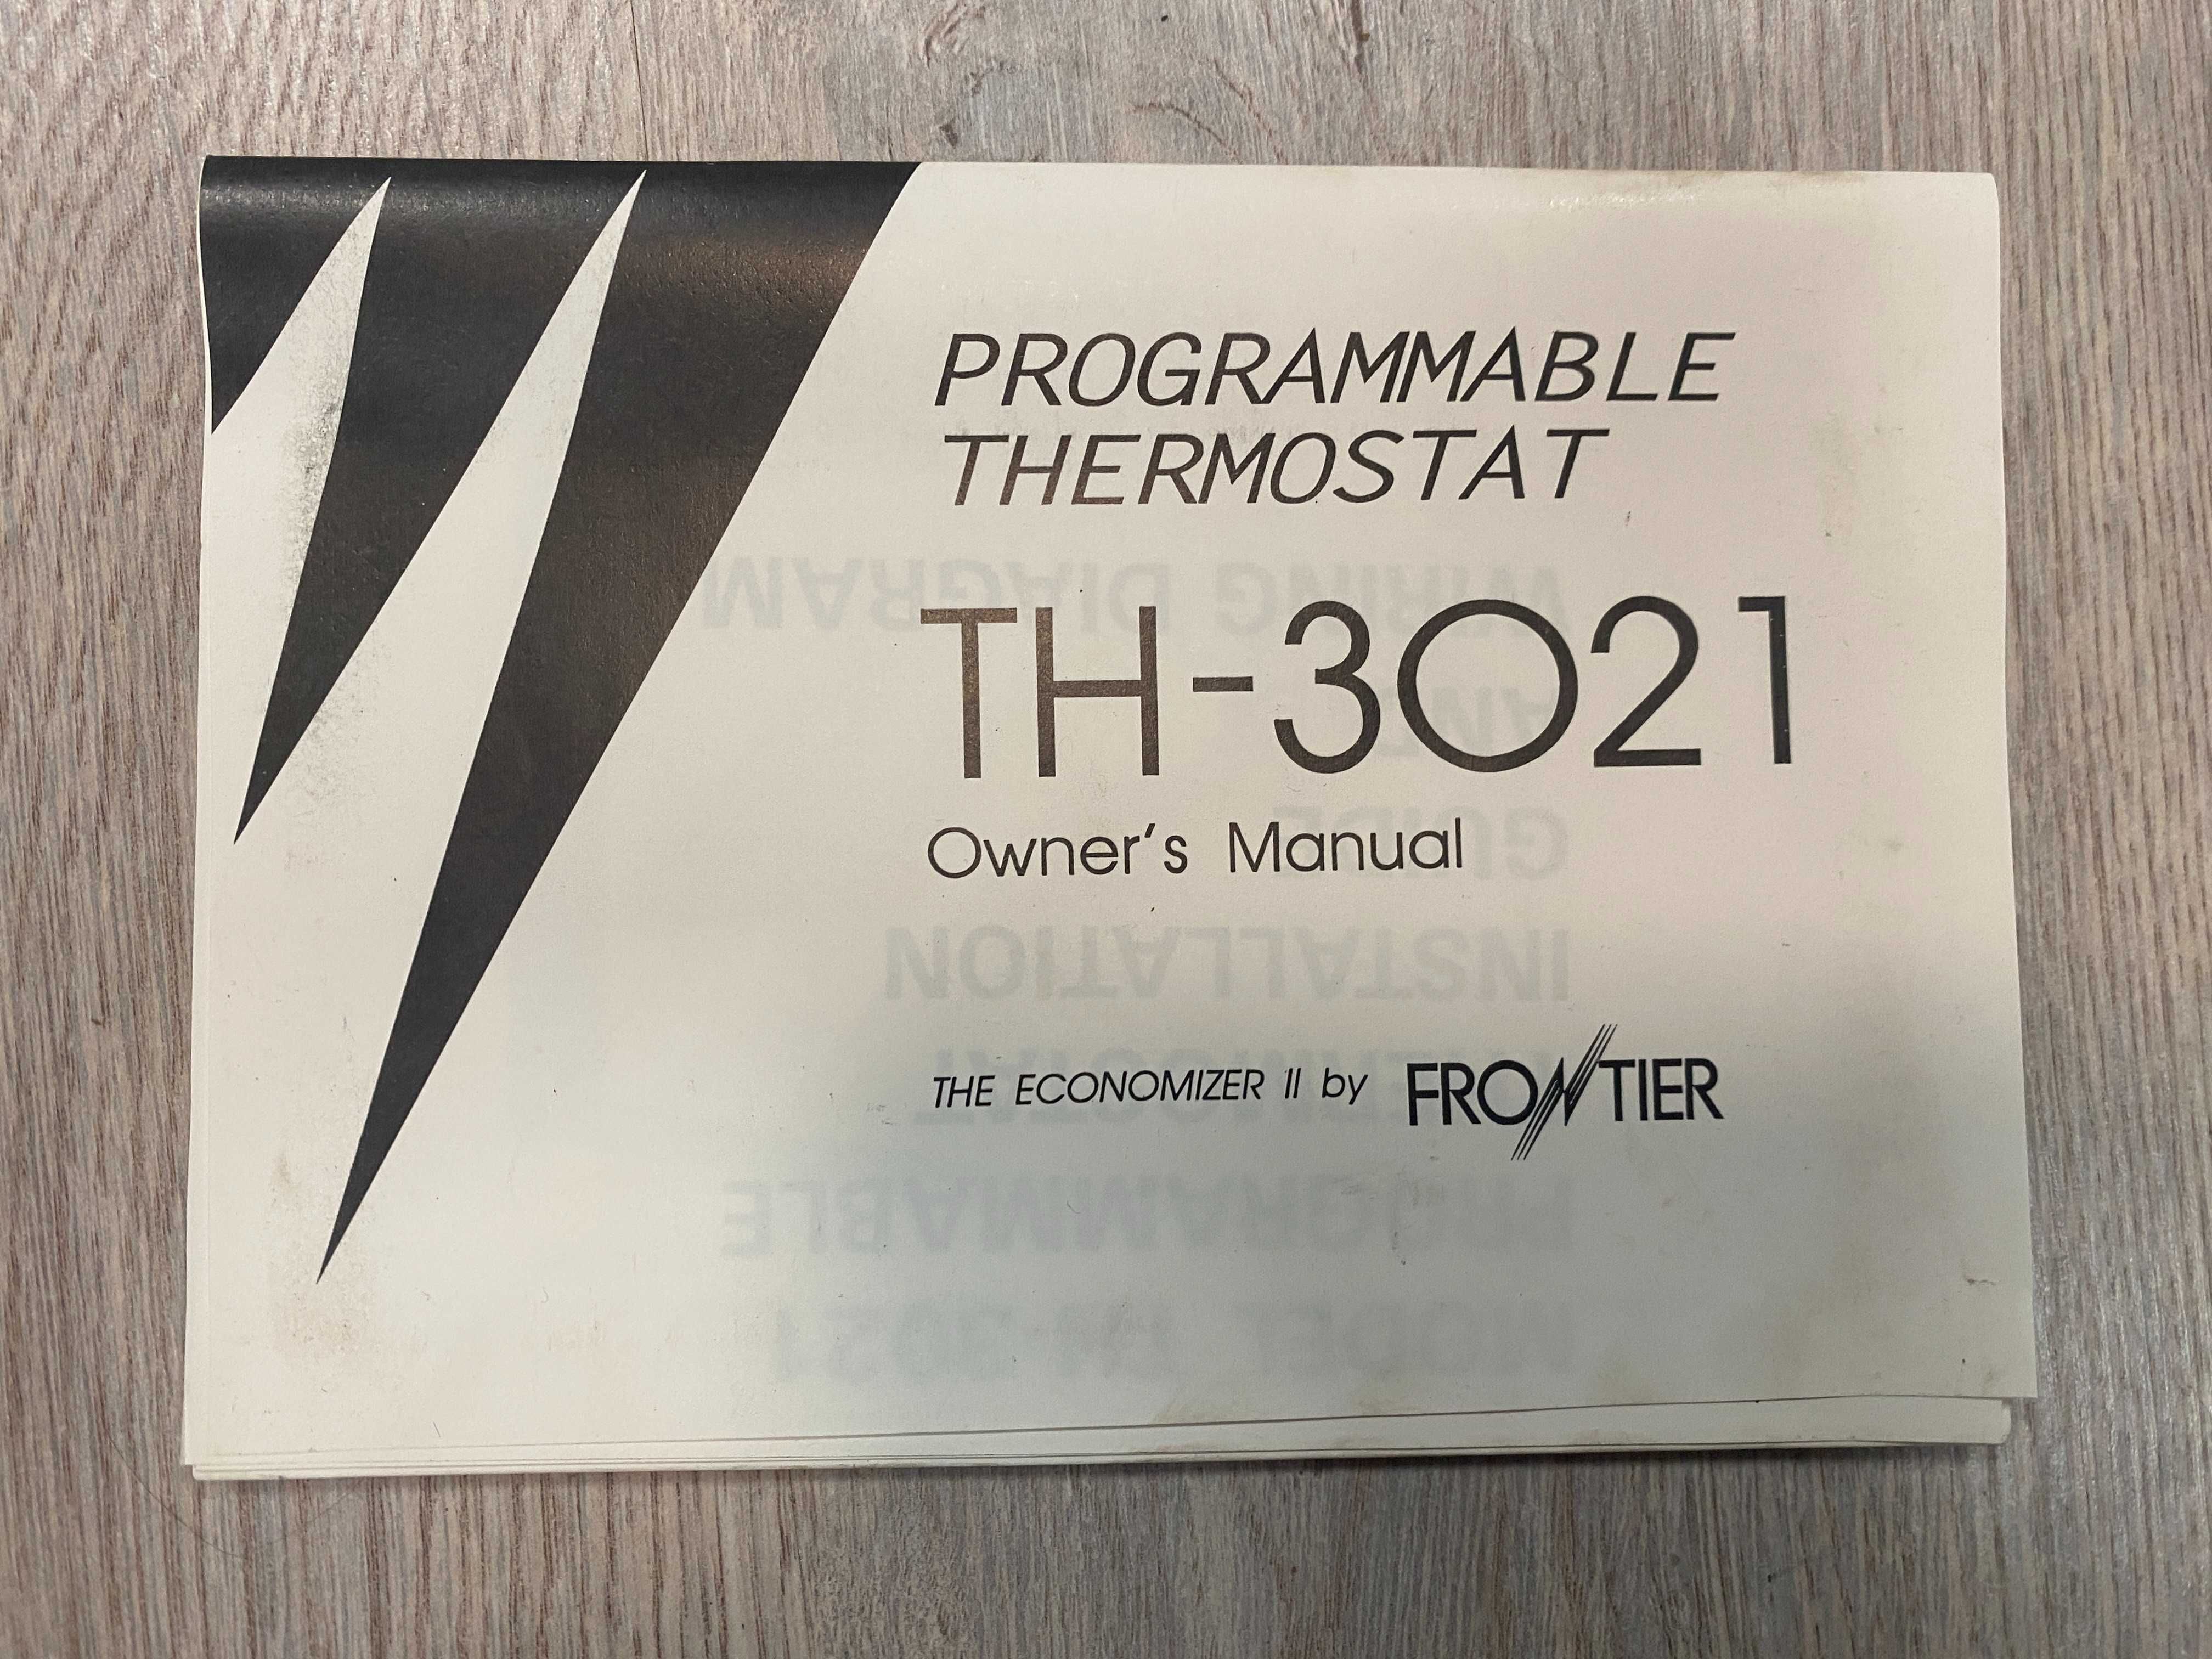 Termostat Frontier TH-3021